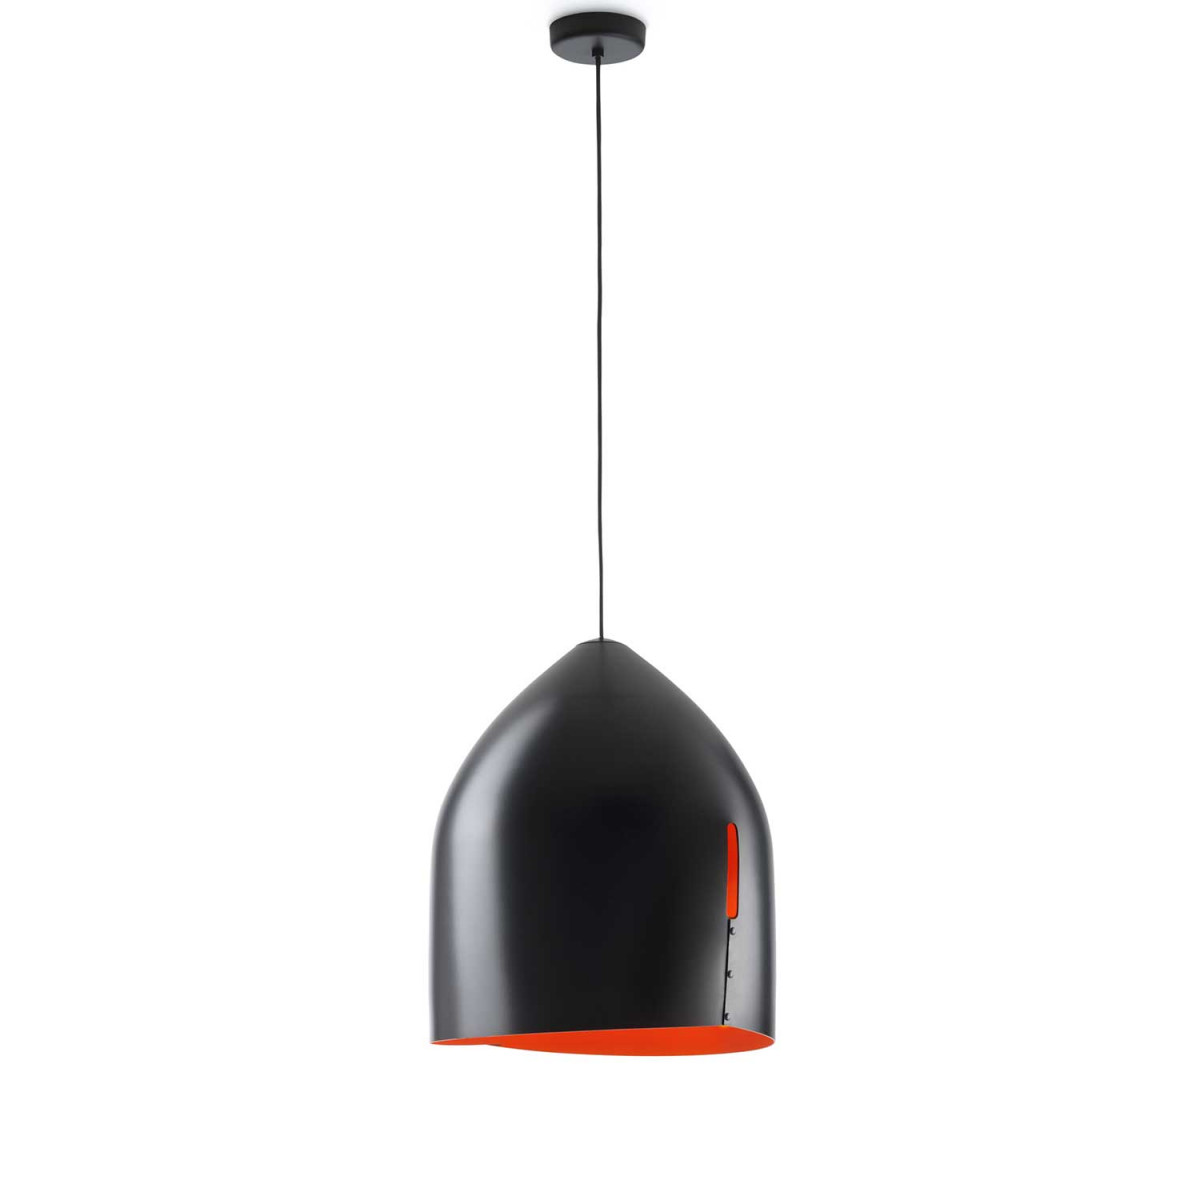 String Light Company BPL002 Black Ceiling Plug-In Pendant Lamp with 10-Foot Cord and On/Off Switch